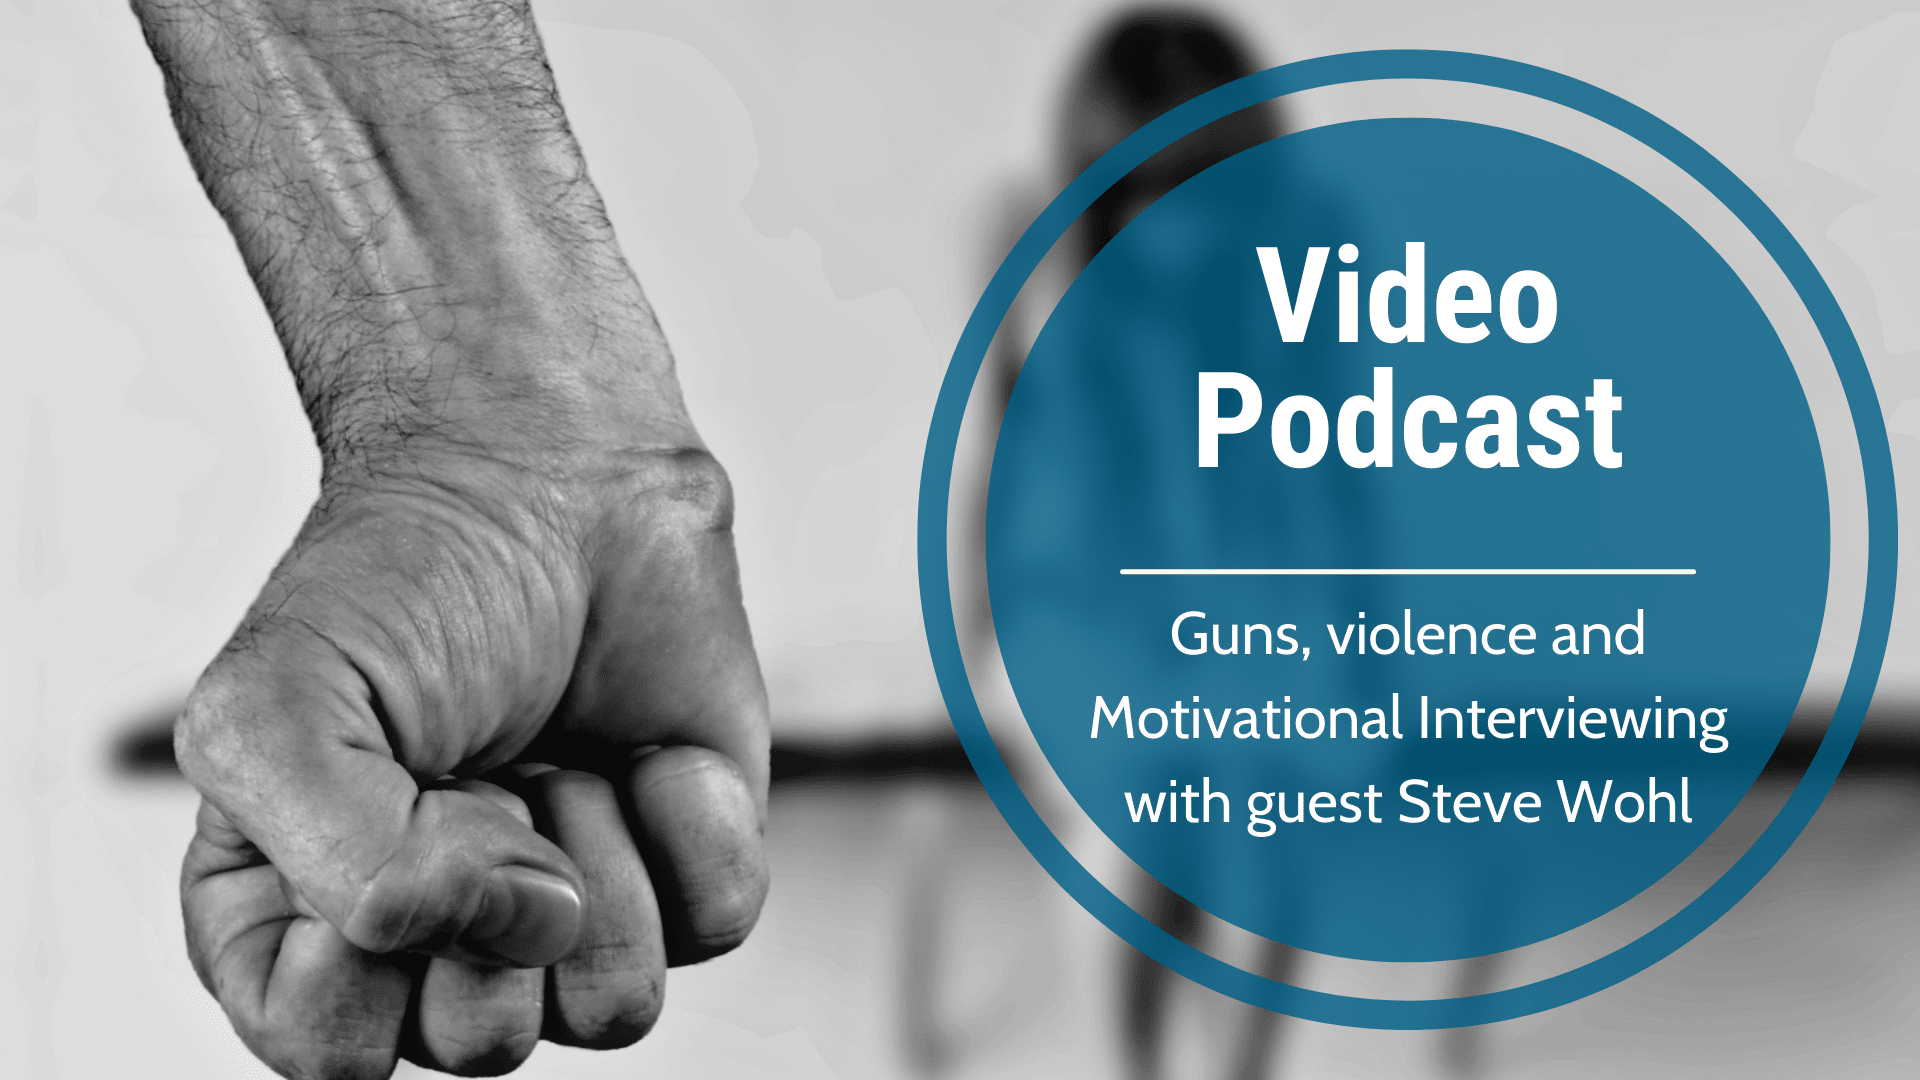 Guns, violence and Motivational Interviewing with guest Steve Wohl